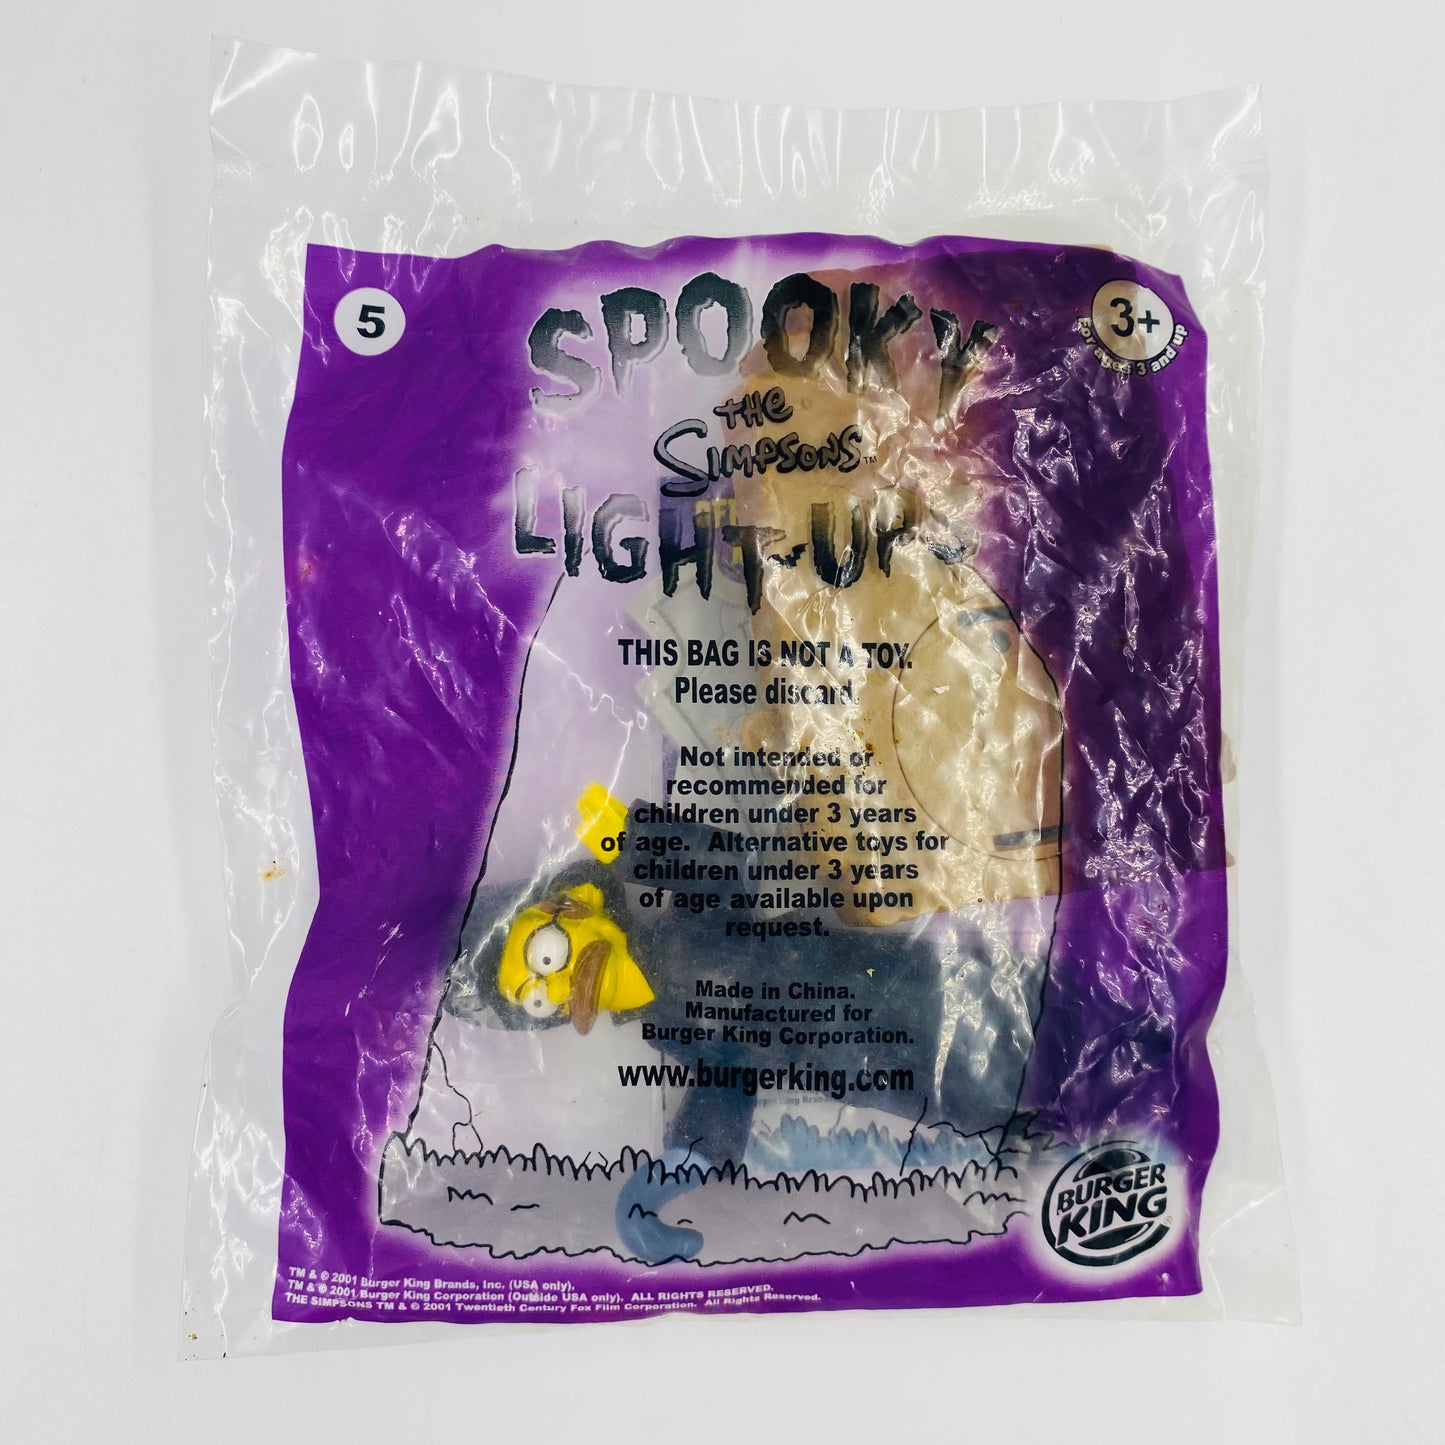 The Simpsons Spooky Light-Ups Ned Flanders Burger King Kids' Meals toy (2001) bagged